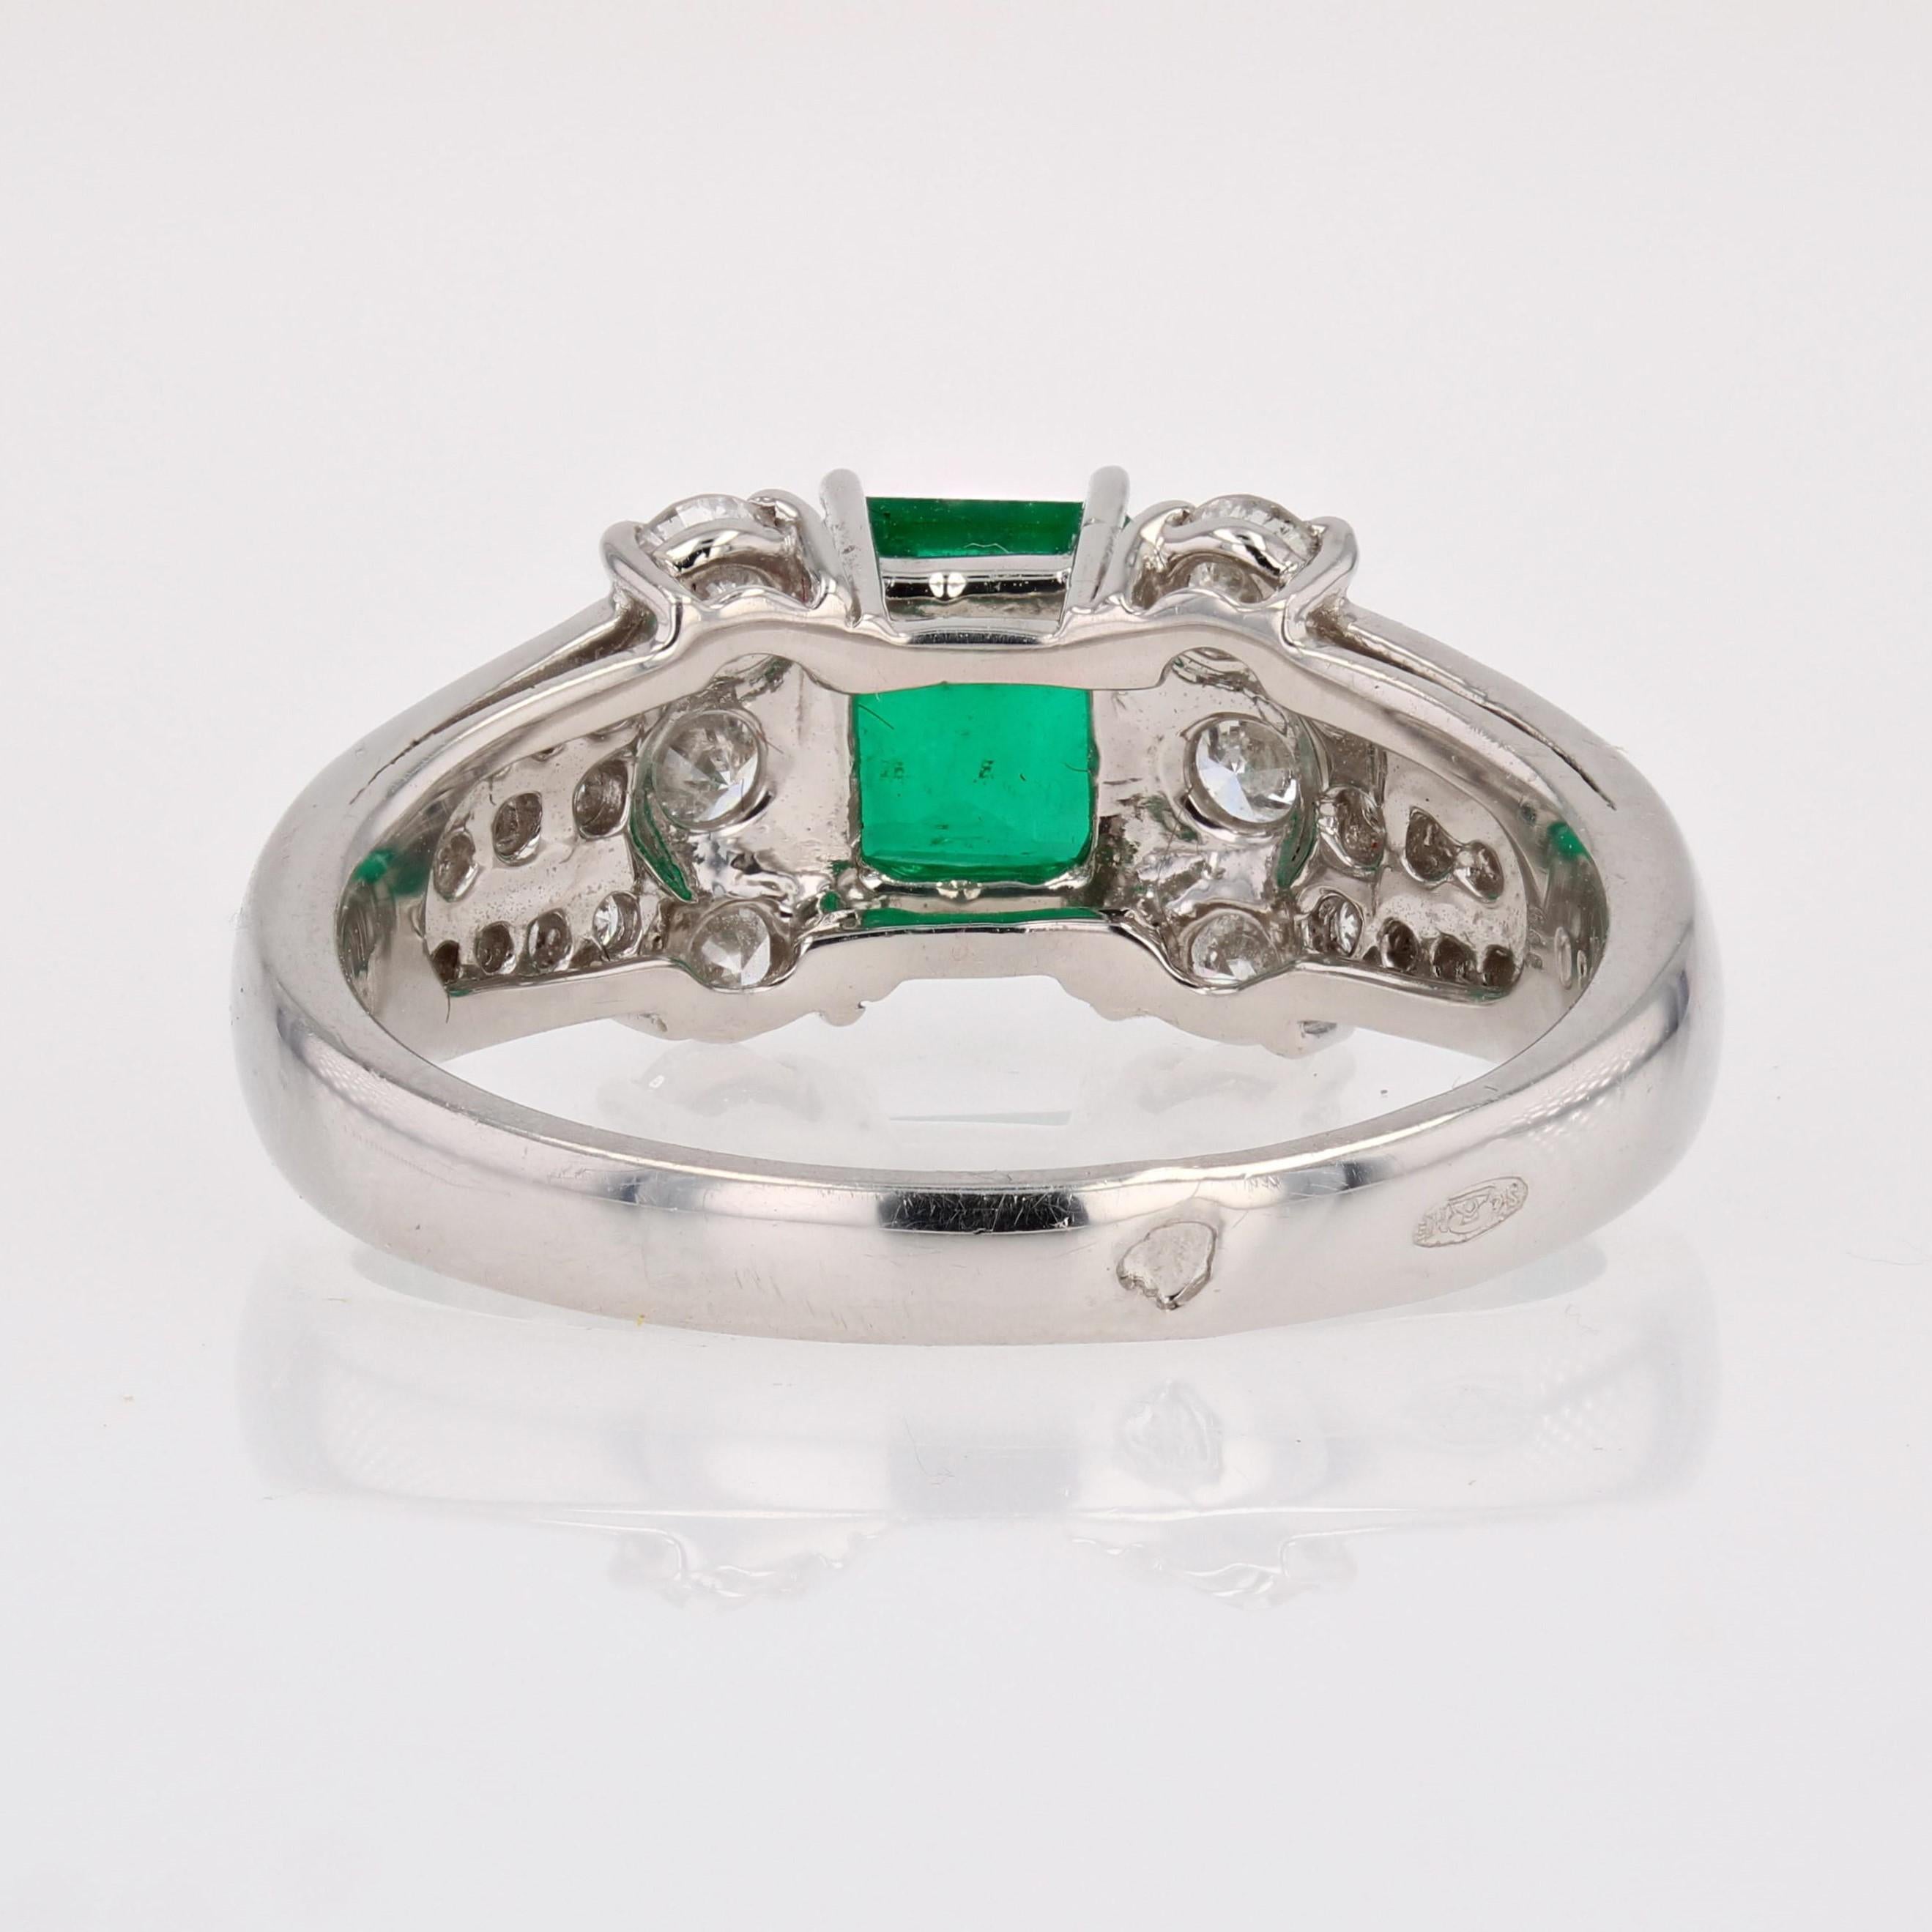 French Modern 0.82 Carat Colombian Emerald Diamonds Platinum Ring For Sale 10